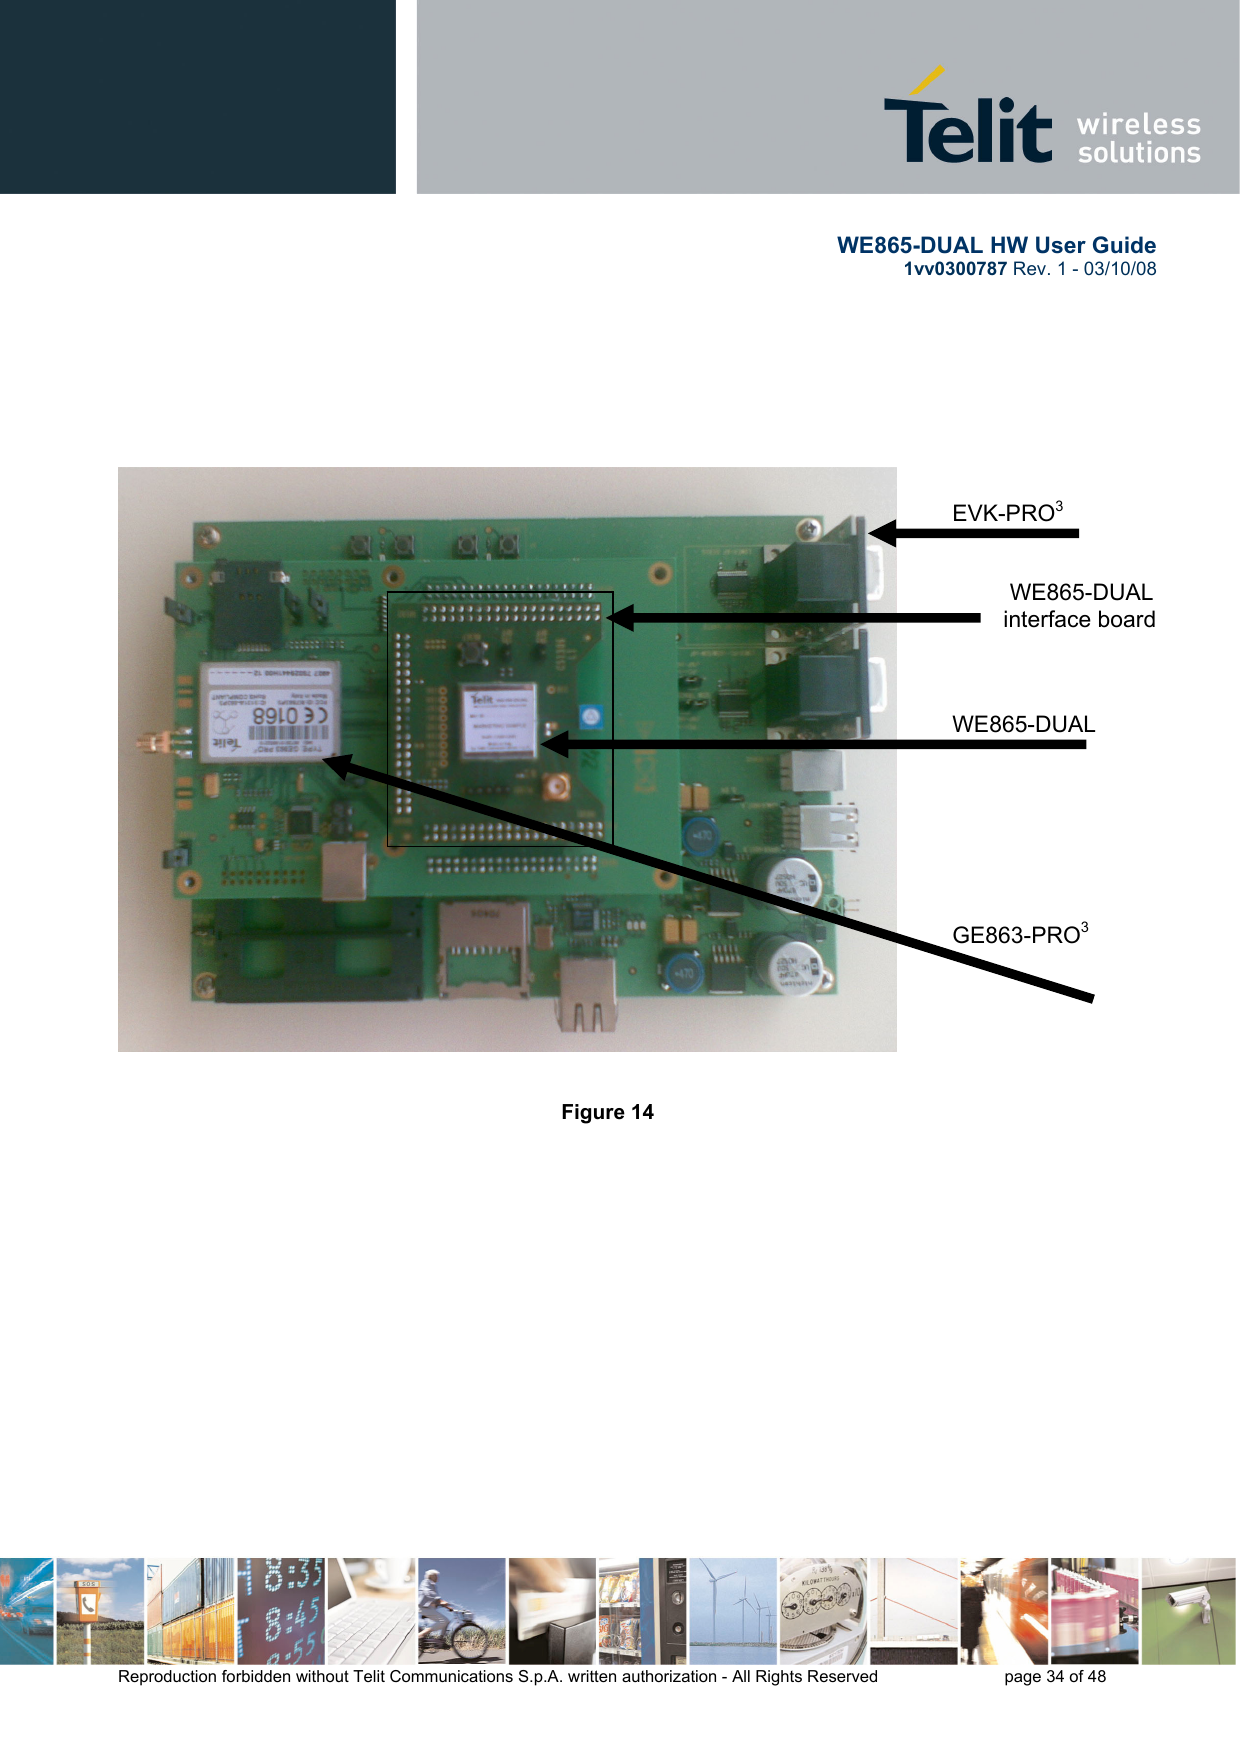       WE865-DUAL HW User Guide 1vv0300787 Rev. 1 - 03/10/08      Reproduction forbidden without Telit Communications S.p.A. written authorization - All Rights Reserved    page 34 of 48          Figure 14               EVK-PRO3             WE865-DUAL         interface board    WE865-DUAL        GE863-PRO3 